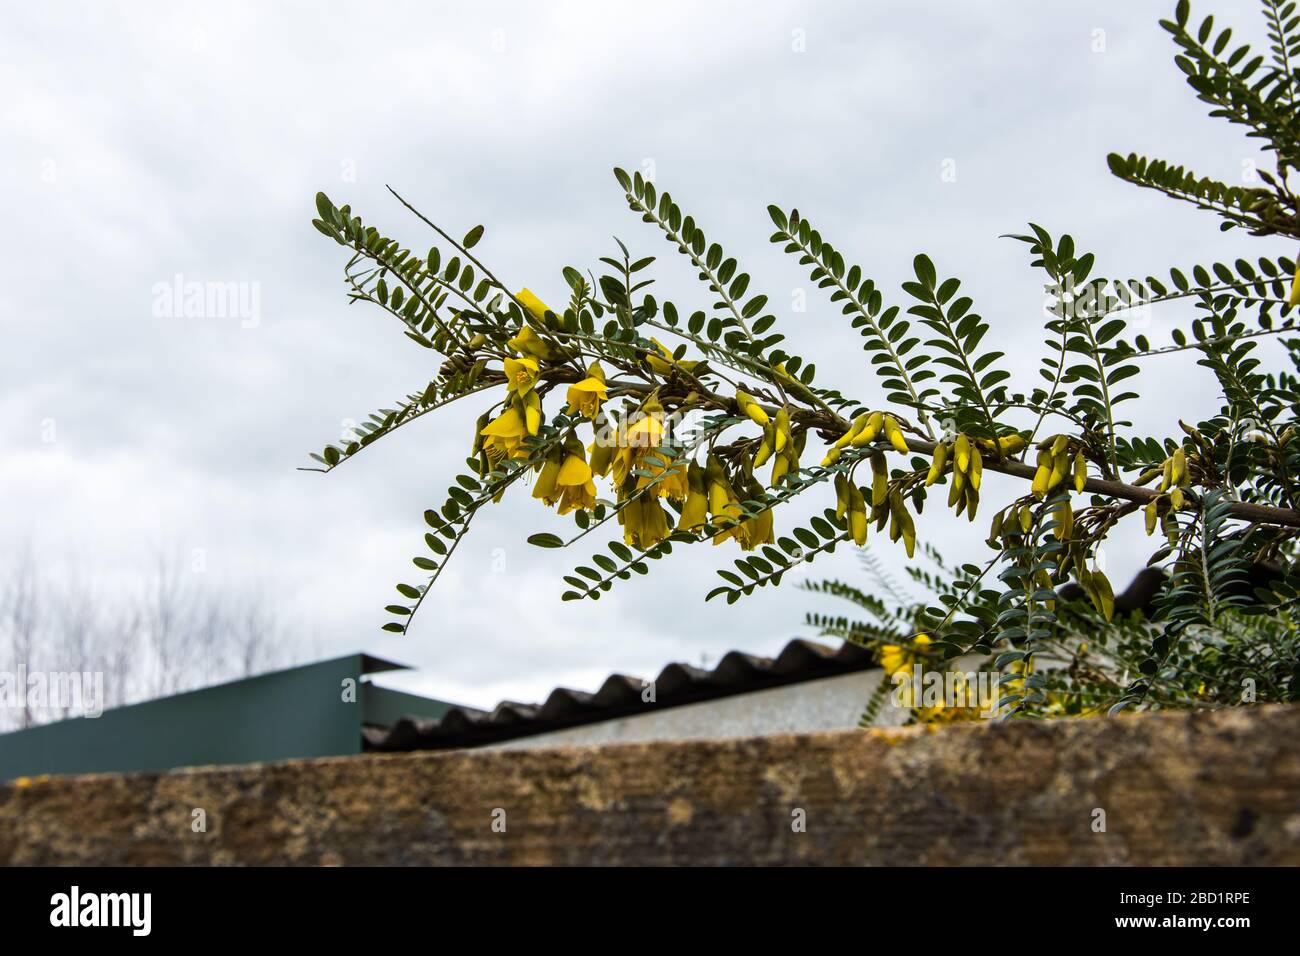 A branch of a Large Leave Kowhai plant  Sophora tetraptera, showing leaves and yellow flowers in spring UK Stock Photo